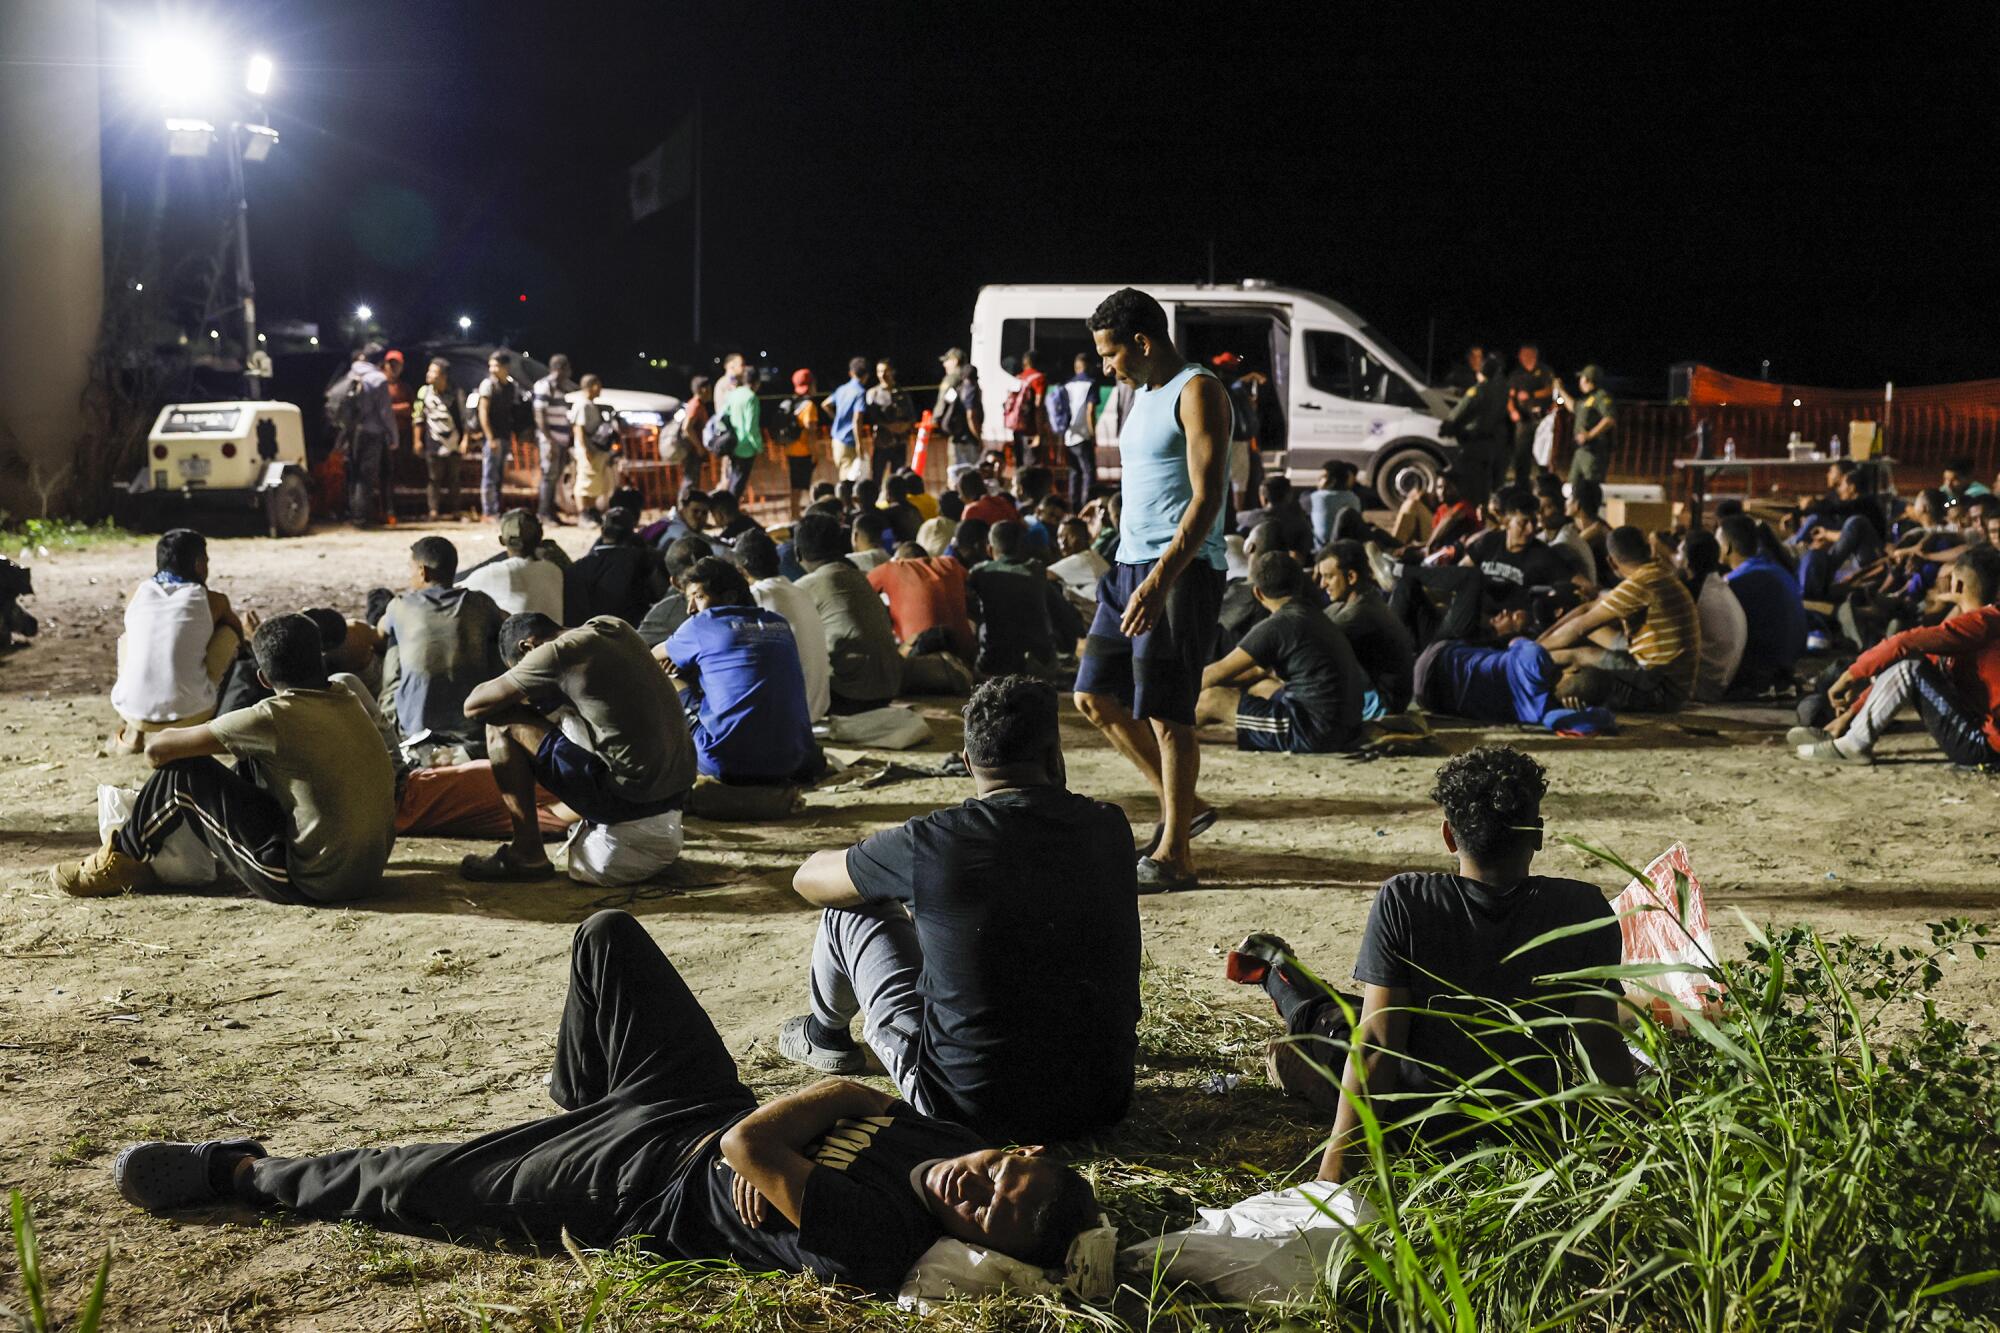 Hundreds of migrant men wait to be transported by US Border Patrol from a holding area near the Rio Grande